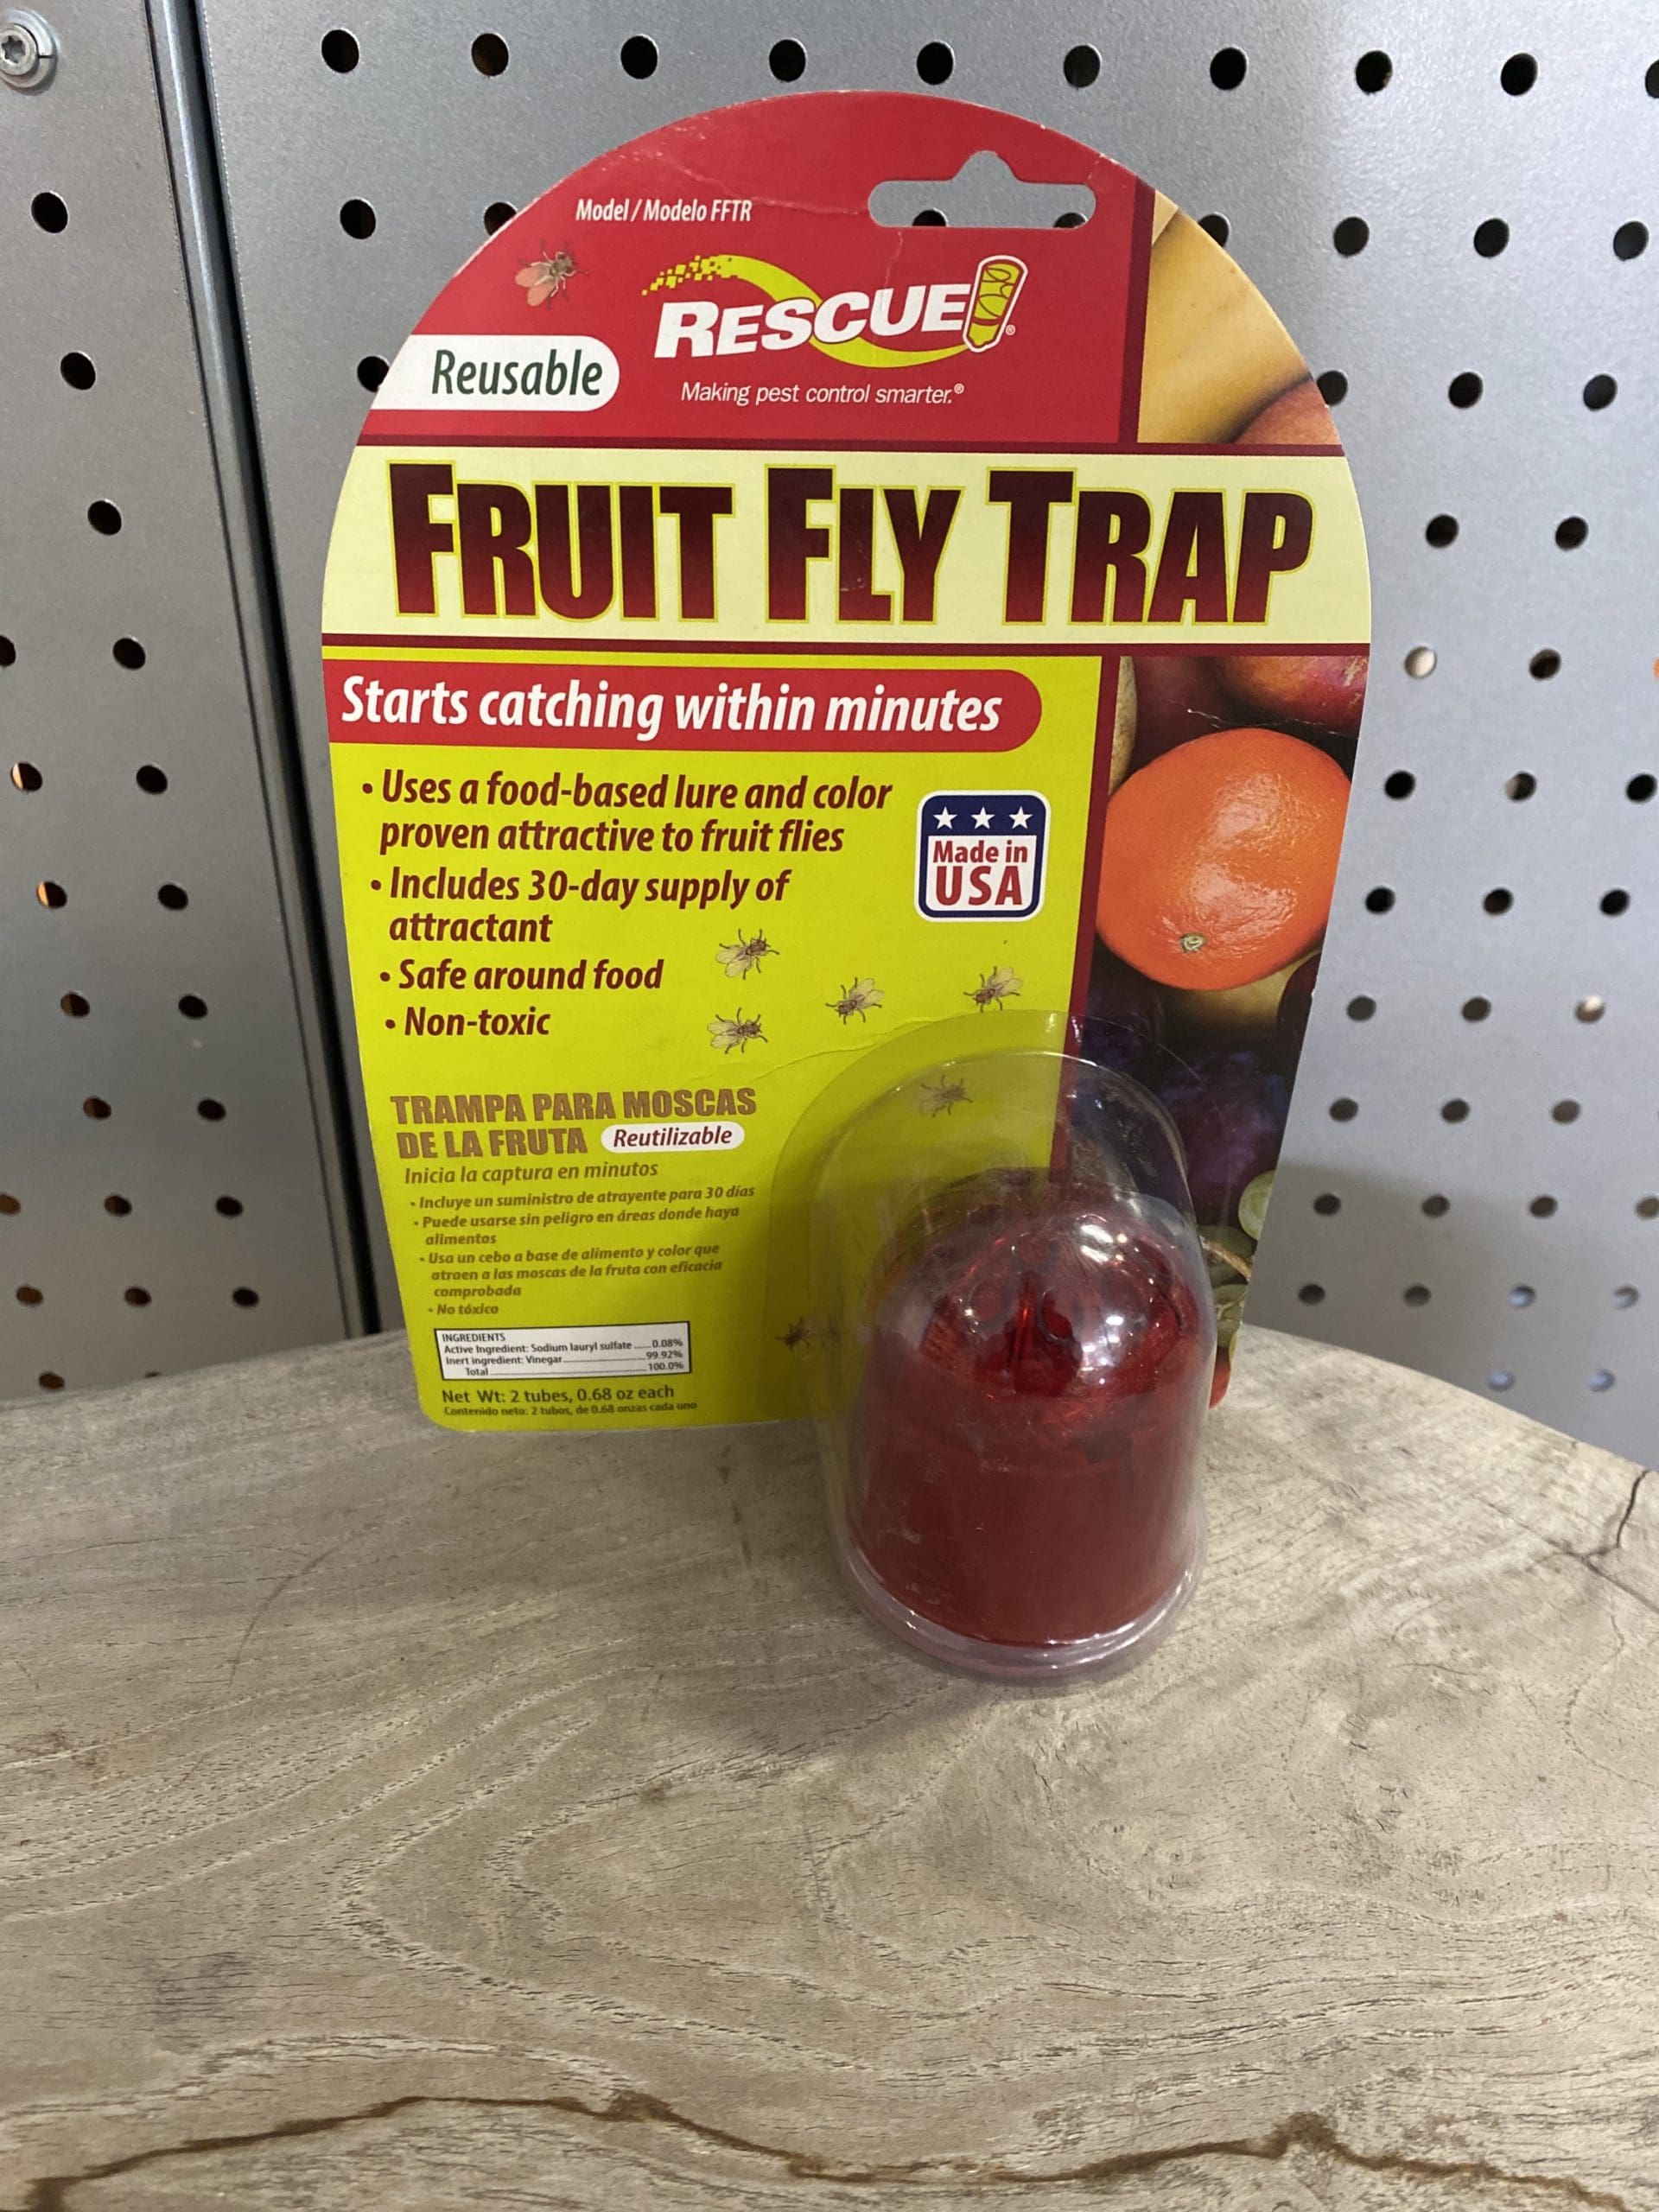 Fruit Fly Trap - Pahl's Market - Apple Valley, MN